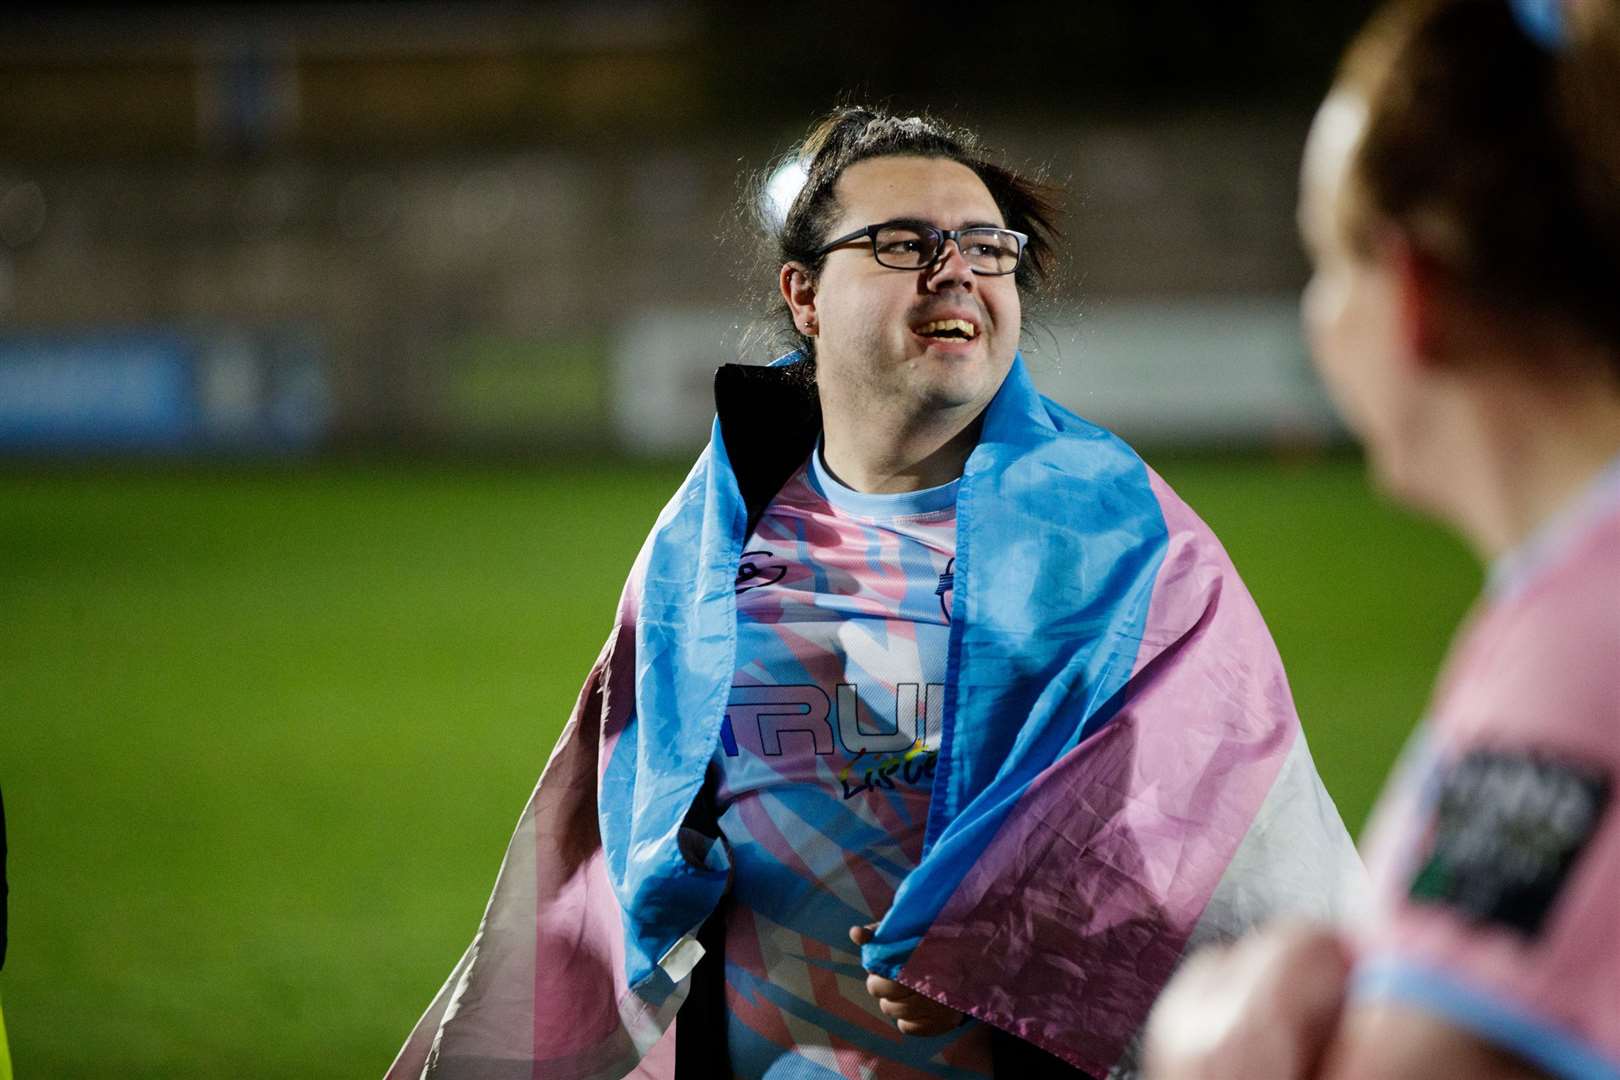 Lucy Gladding, from Gravesend, took part in a landmark football friendly between Dulwich Hamlet Ladies and TRUK United FC. Photo: Liam Asman